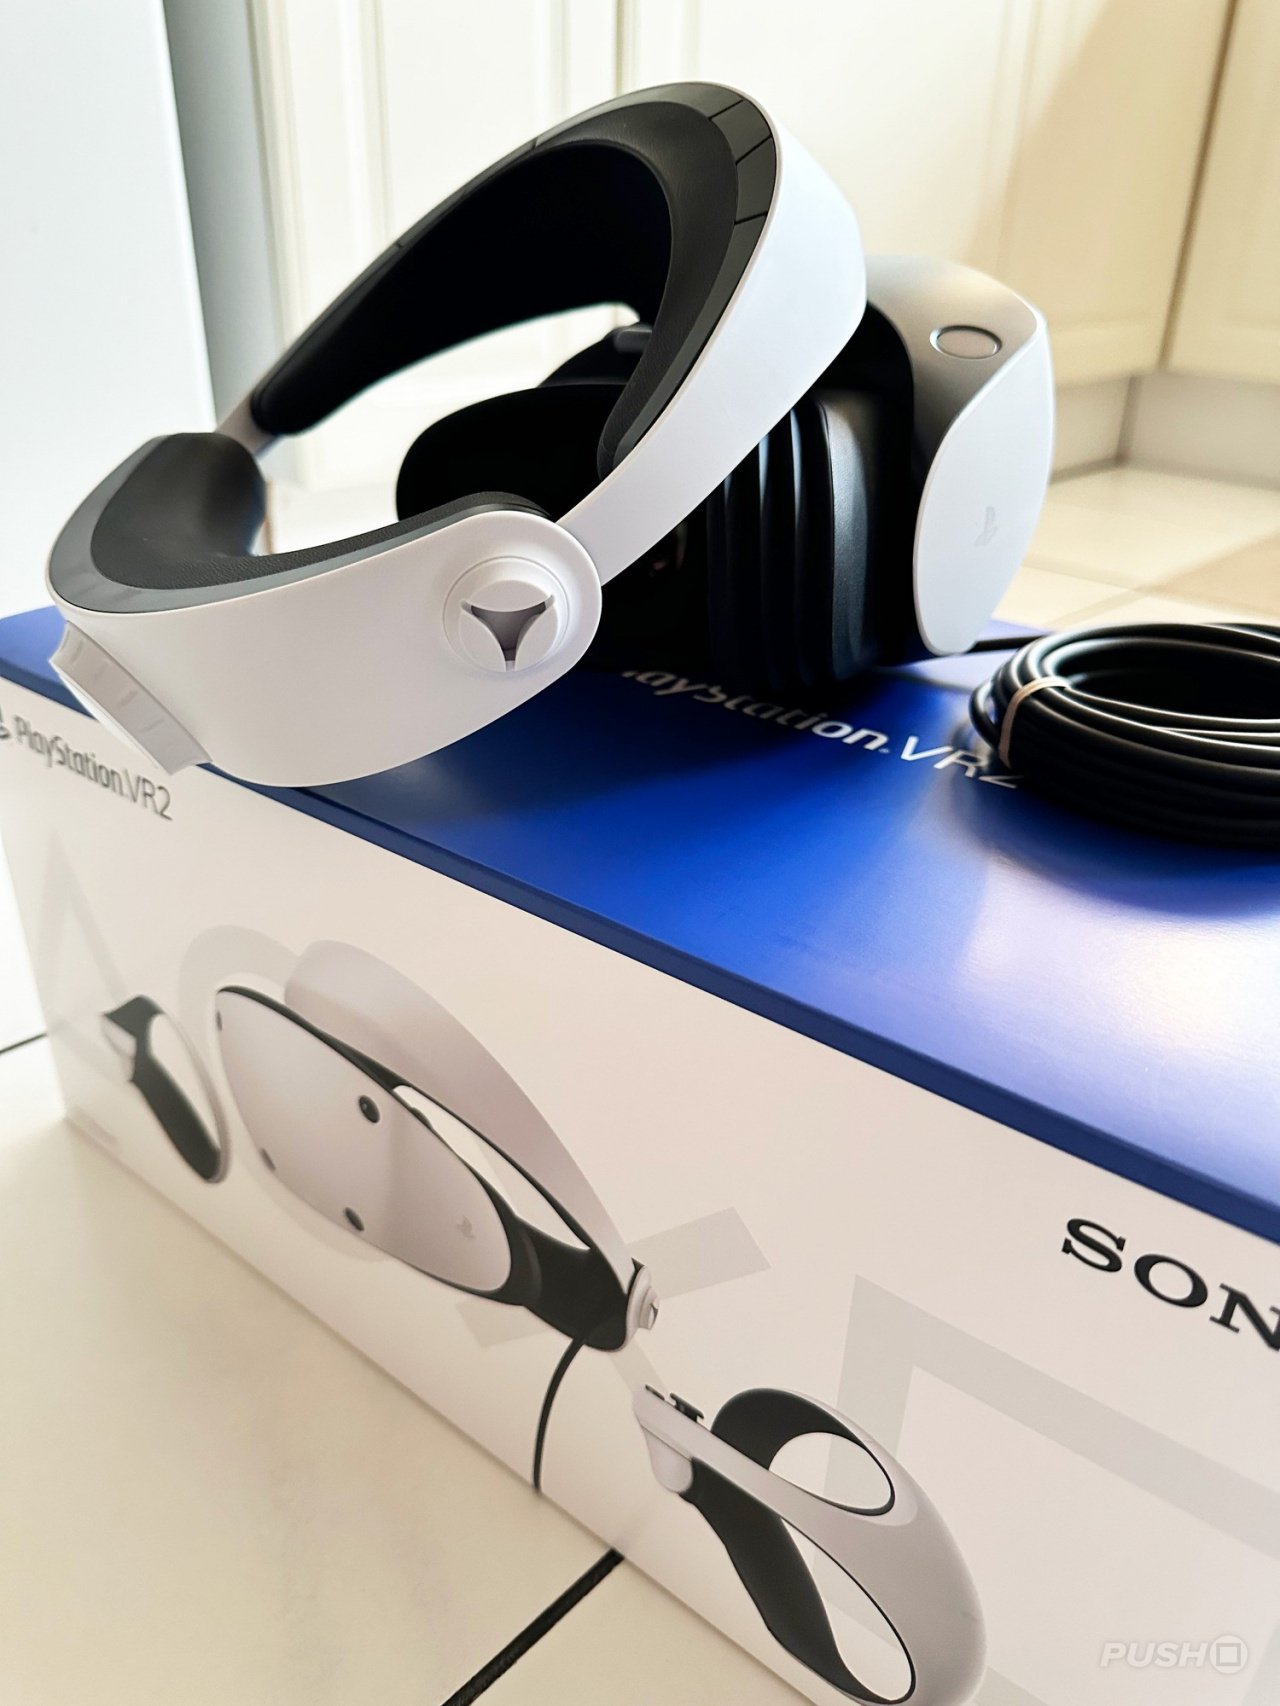 PSVR 2 Unboxing – Close-up with Sony's New Headset – Road to VR